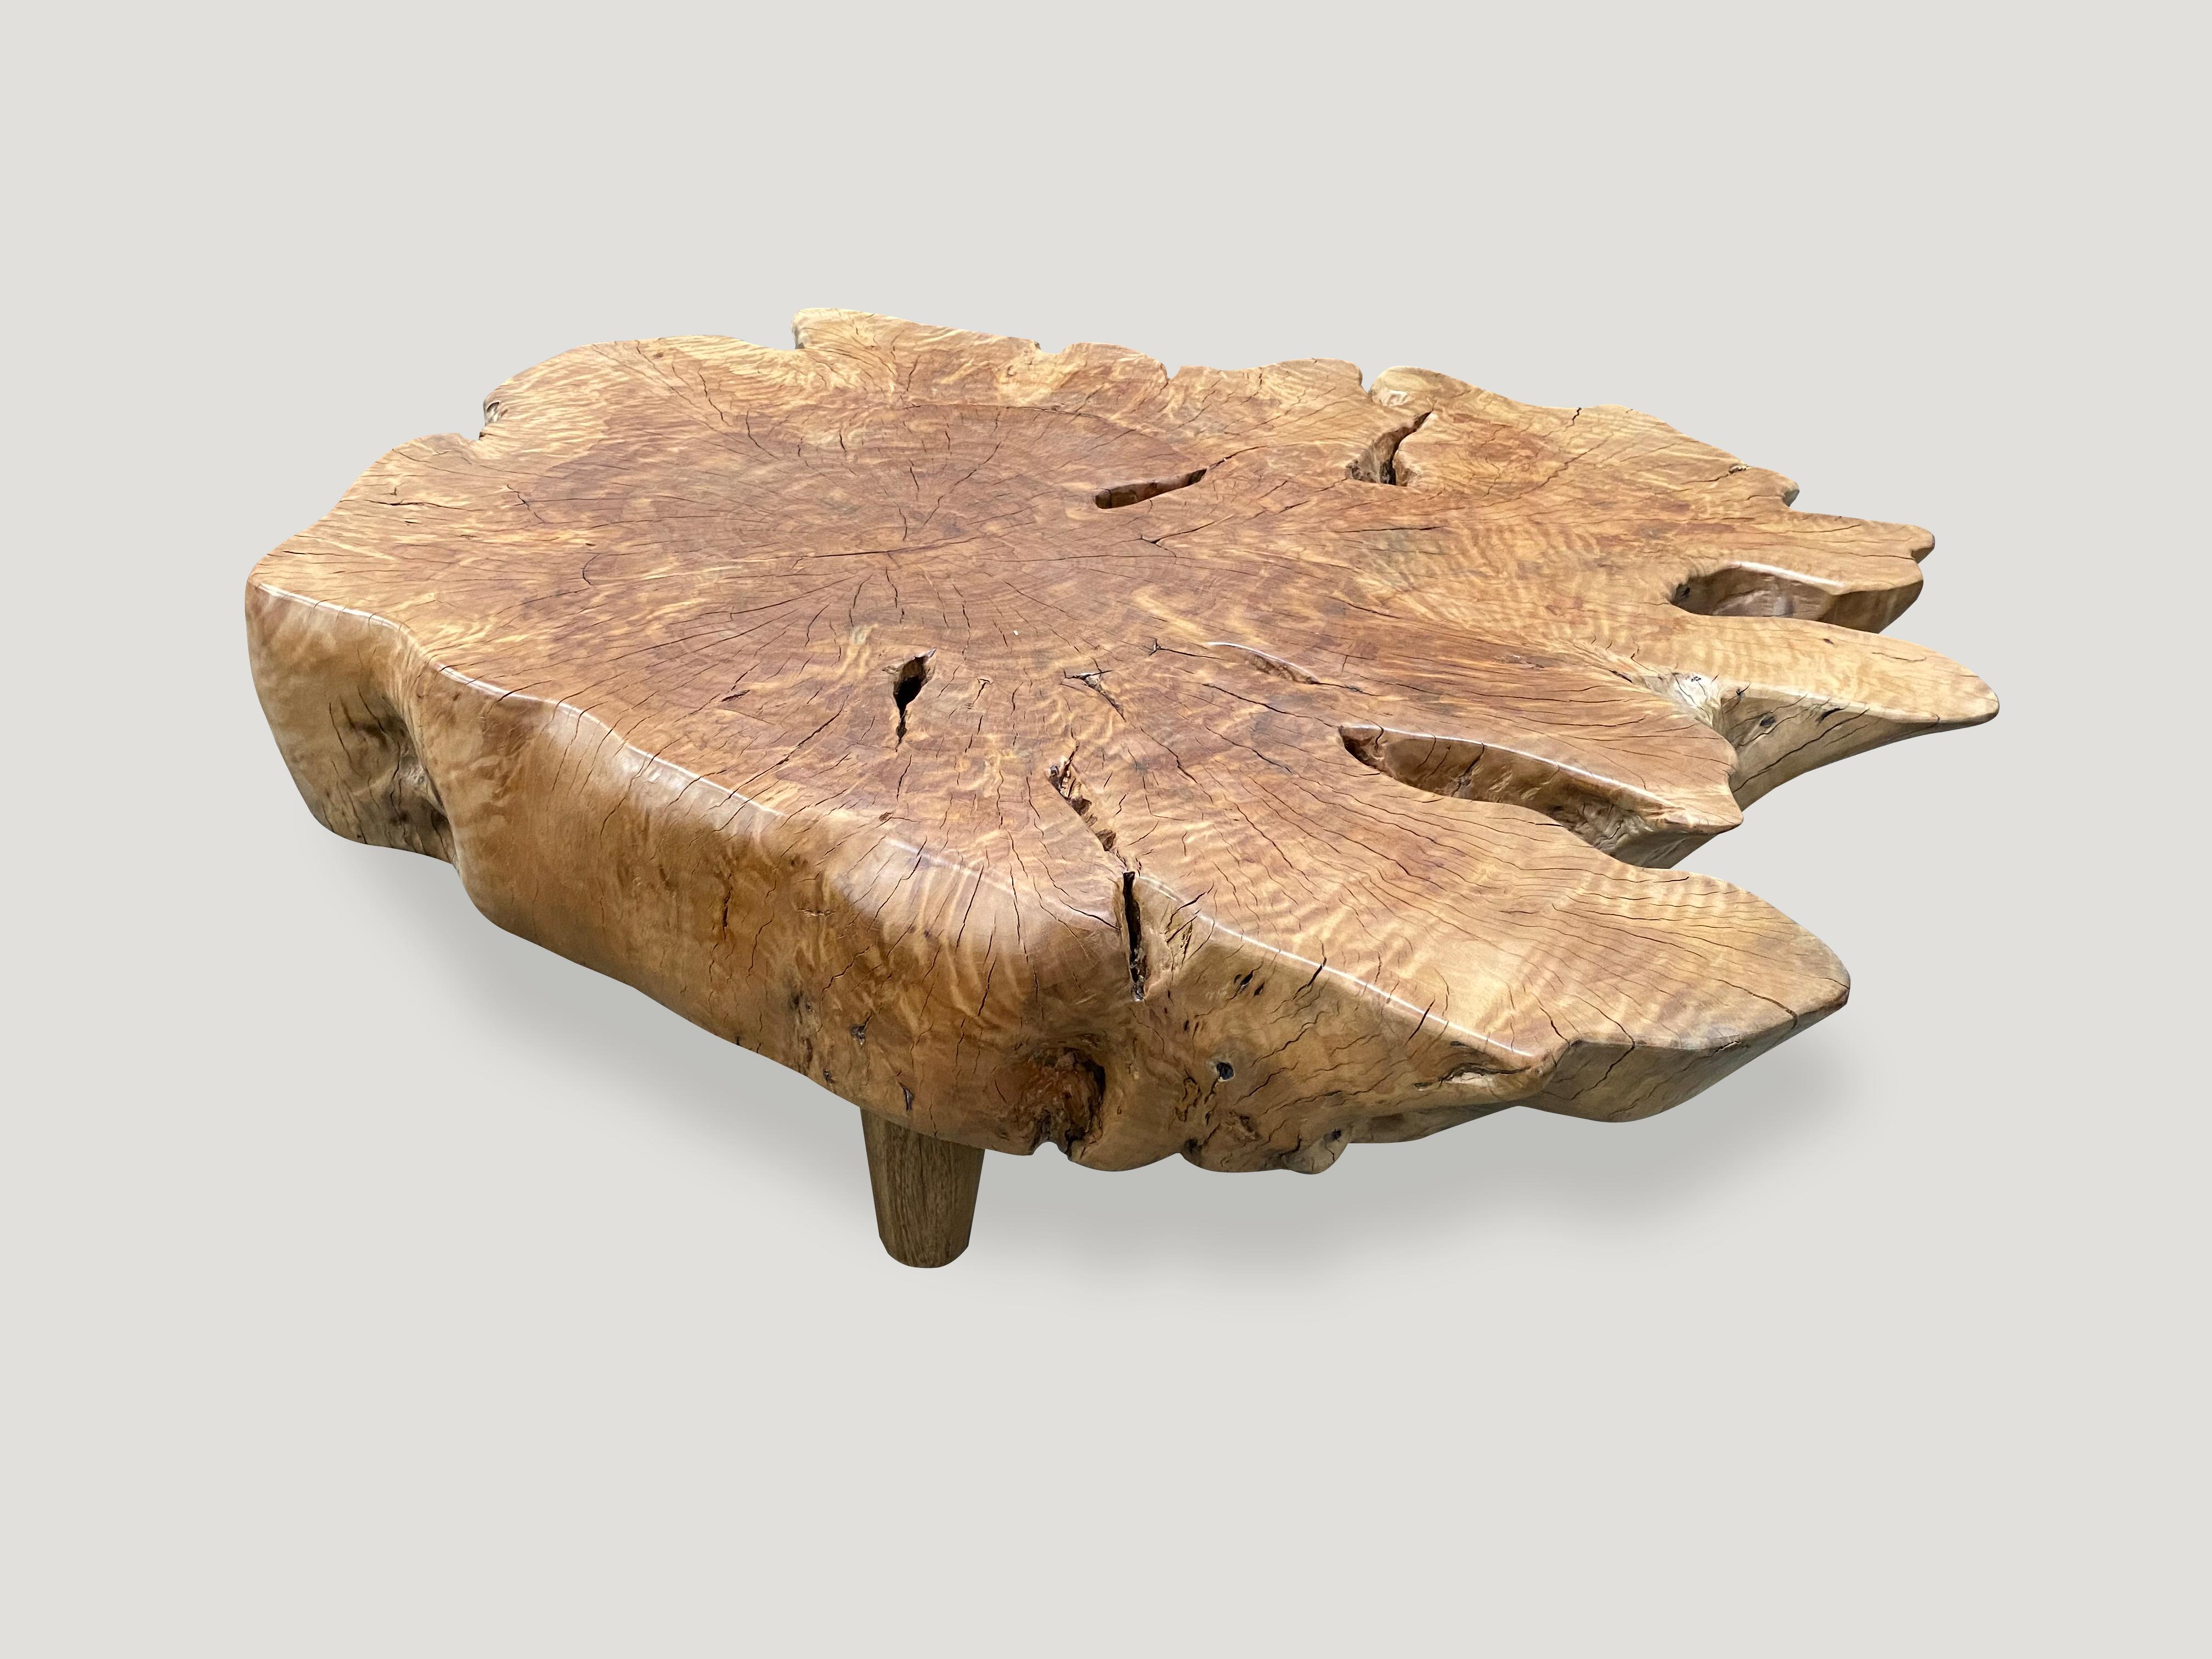 Impressive coffee table made from a six inch slab of reclaimed lychee wood with a natural oil finish. Floating on mid century style legs. Organic with a twist. 

Own an Andrianna Shamaris original.

Andrianna Shamaris. The Leader In Modern